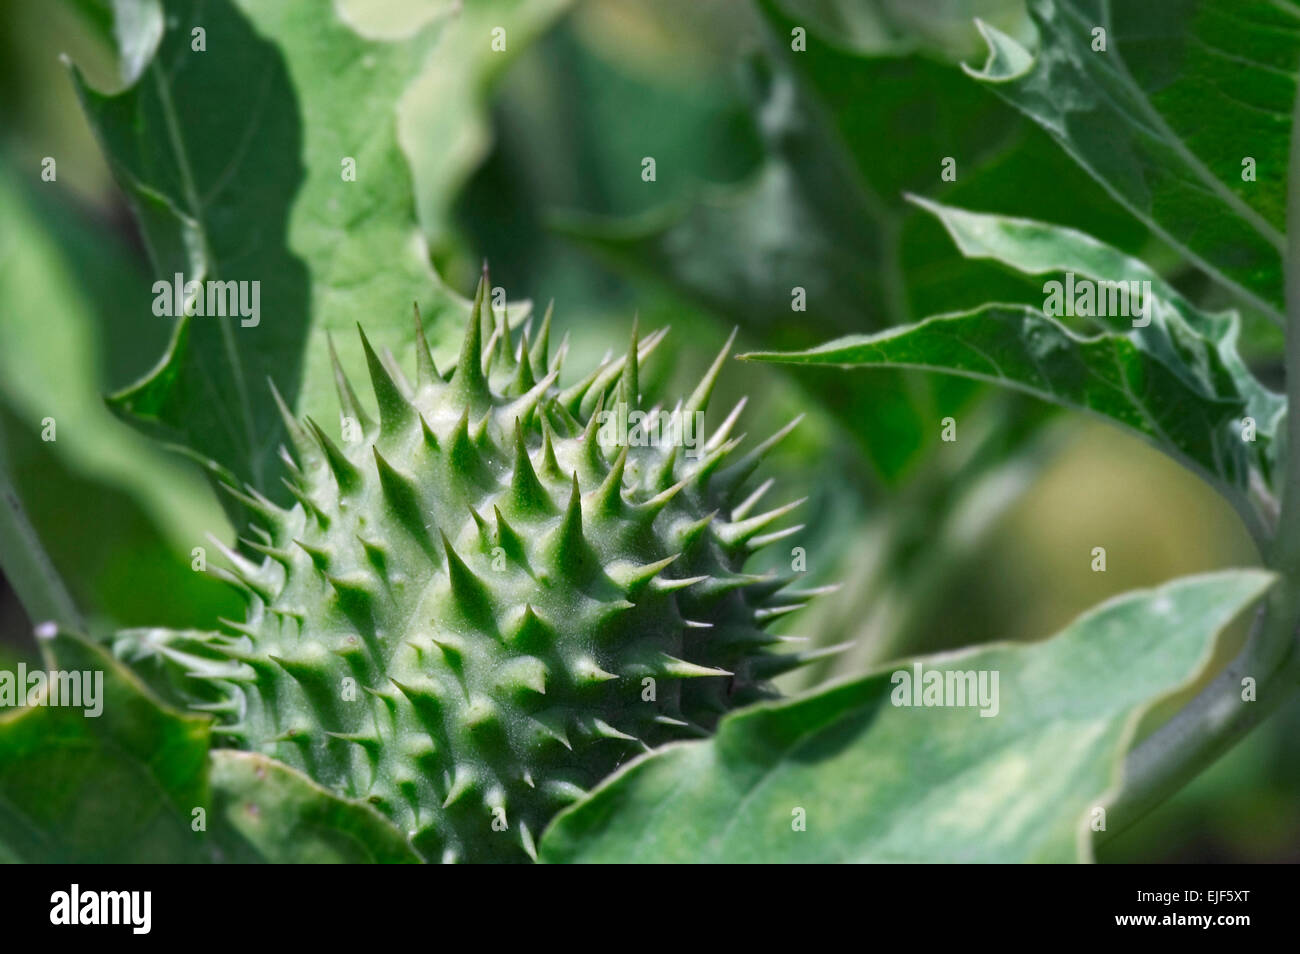 Jimson weed / Devil's snare / datura / thornapple (Datura stramonium) closed seed capsule covered in spines Stock Photo